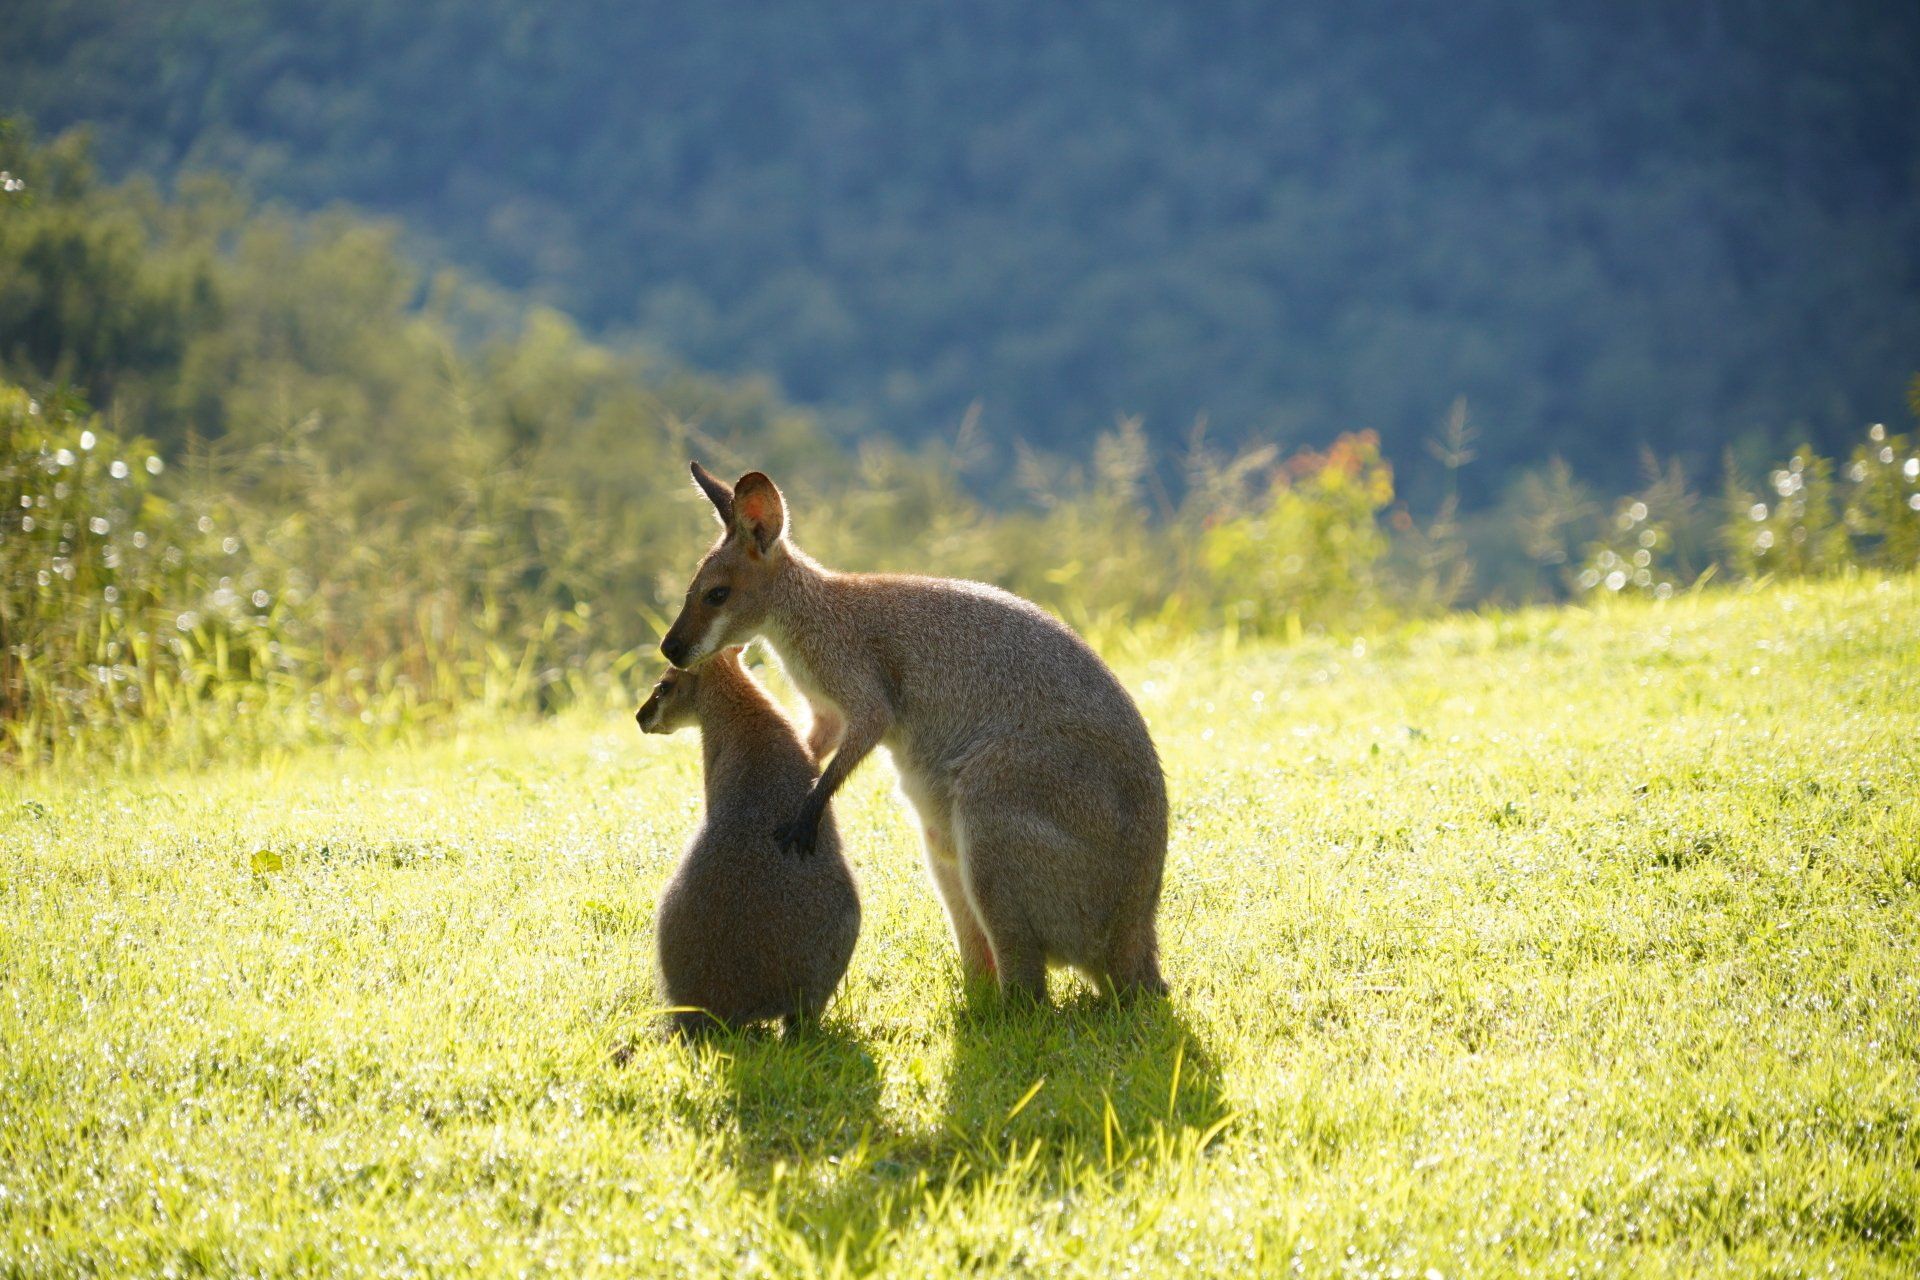 Wallaby with Joey